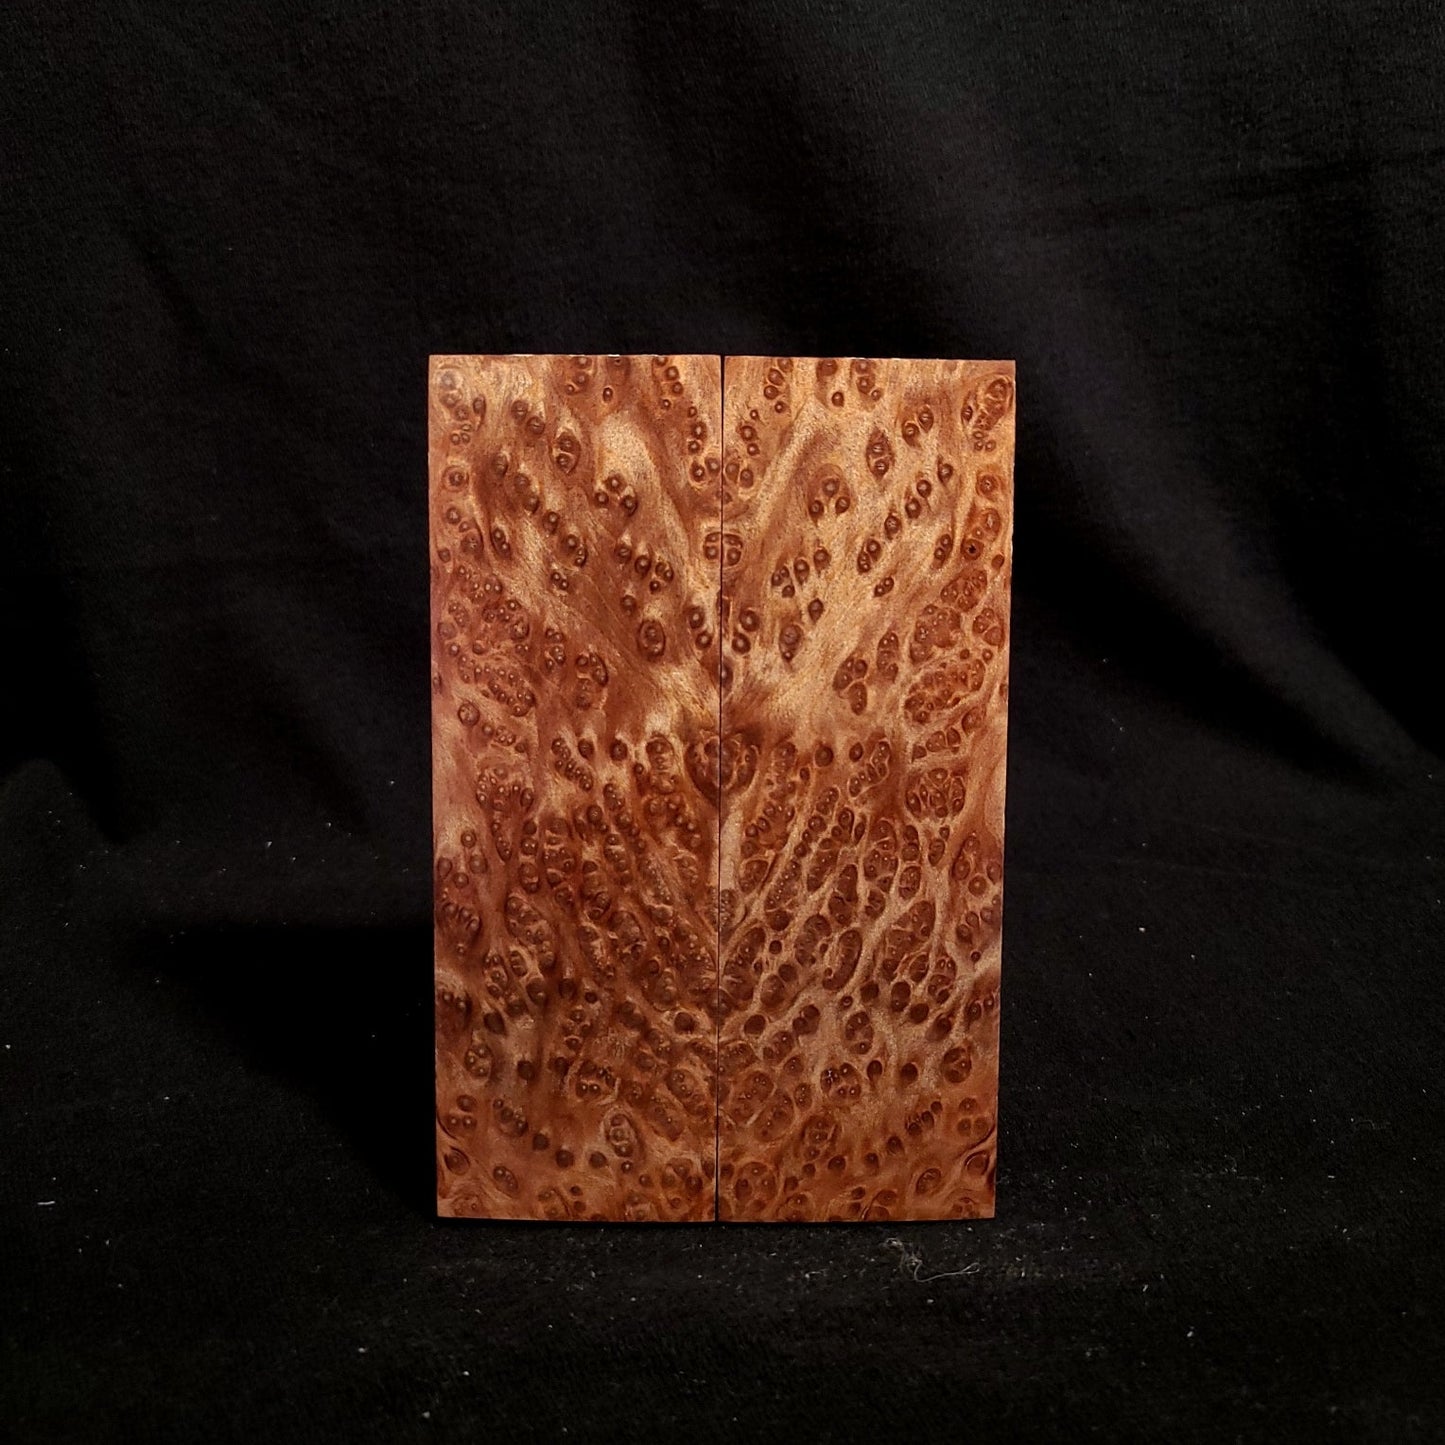 #879 - Redwood Lace Burl - K&G Stabilized - RockSolid Scales -